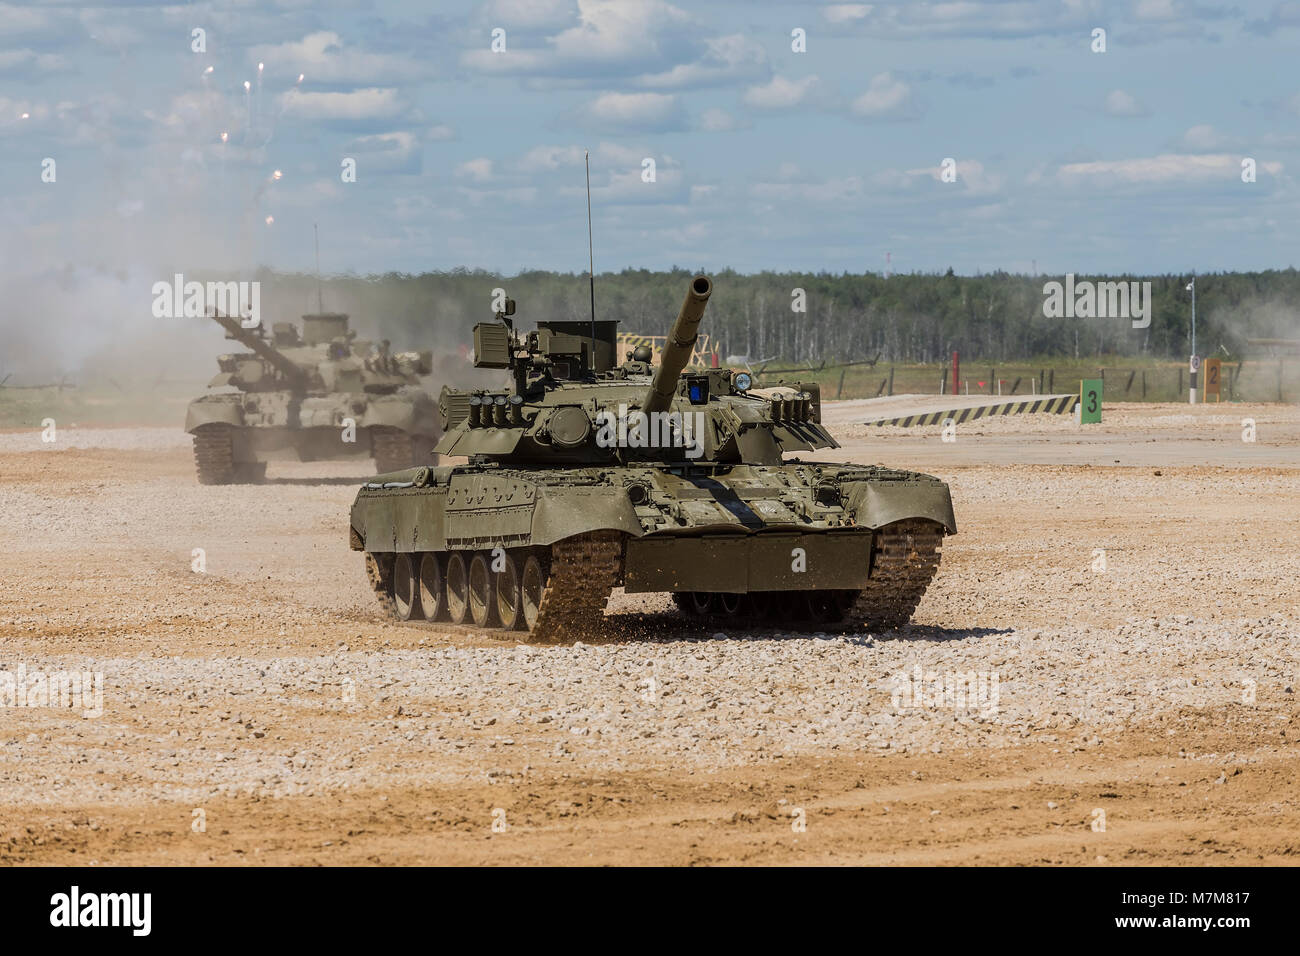 Russian tanks participate in demonstrations move on site Stock Photo